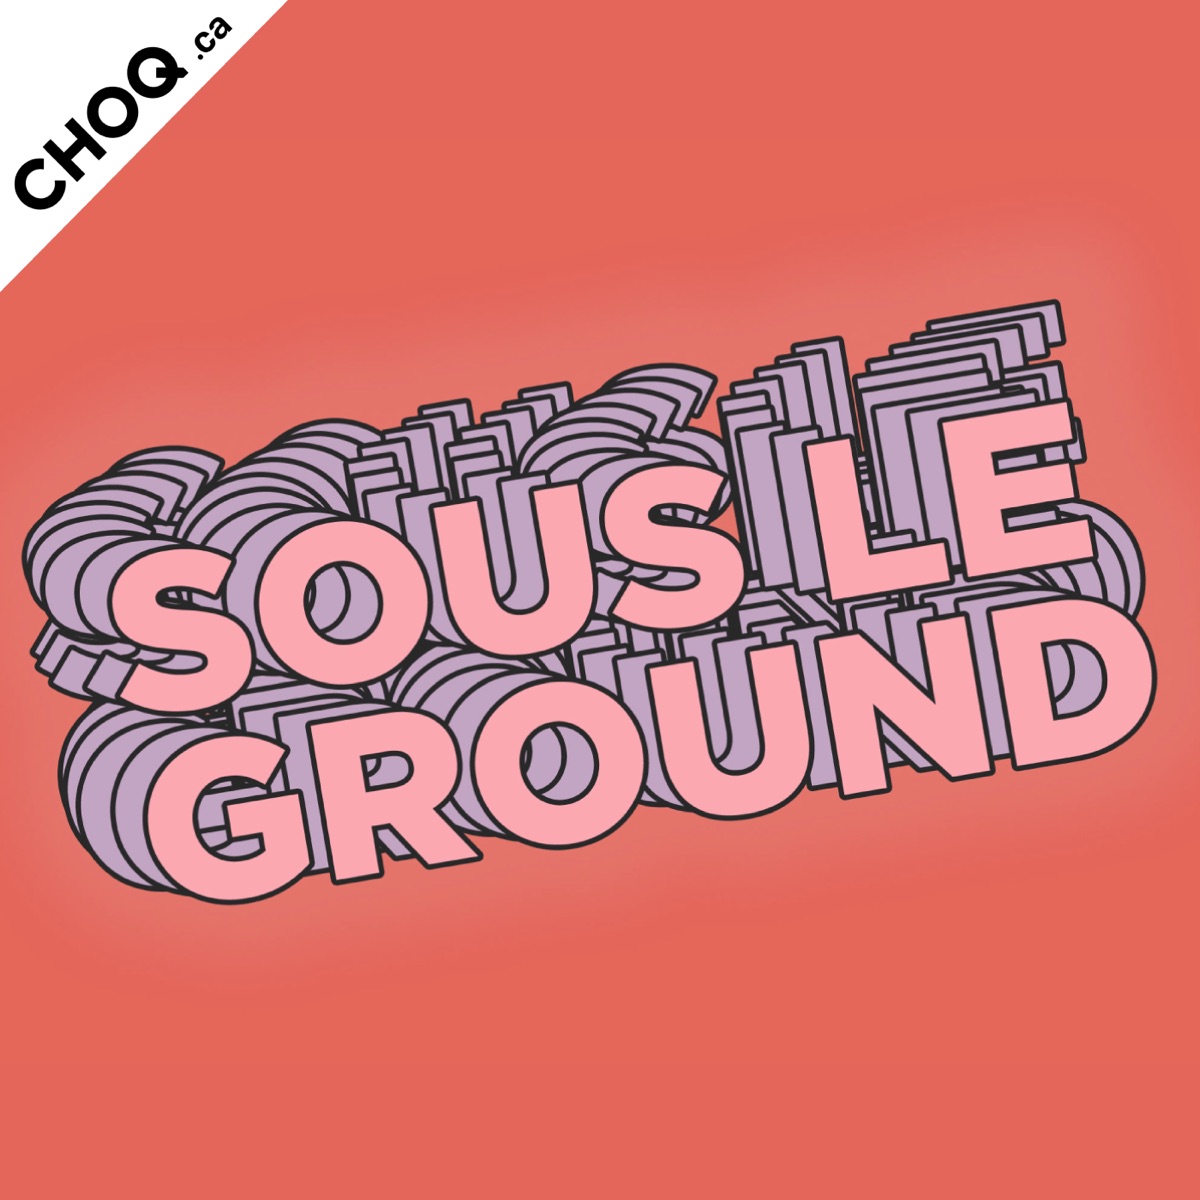 Sous le ground - Подкаст – Podtail